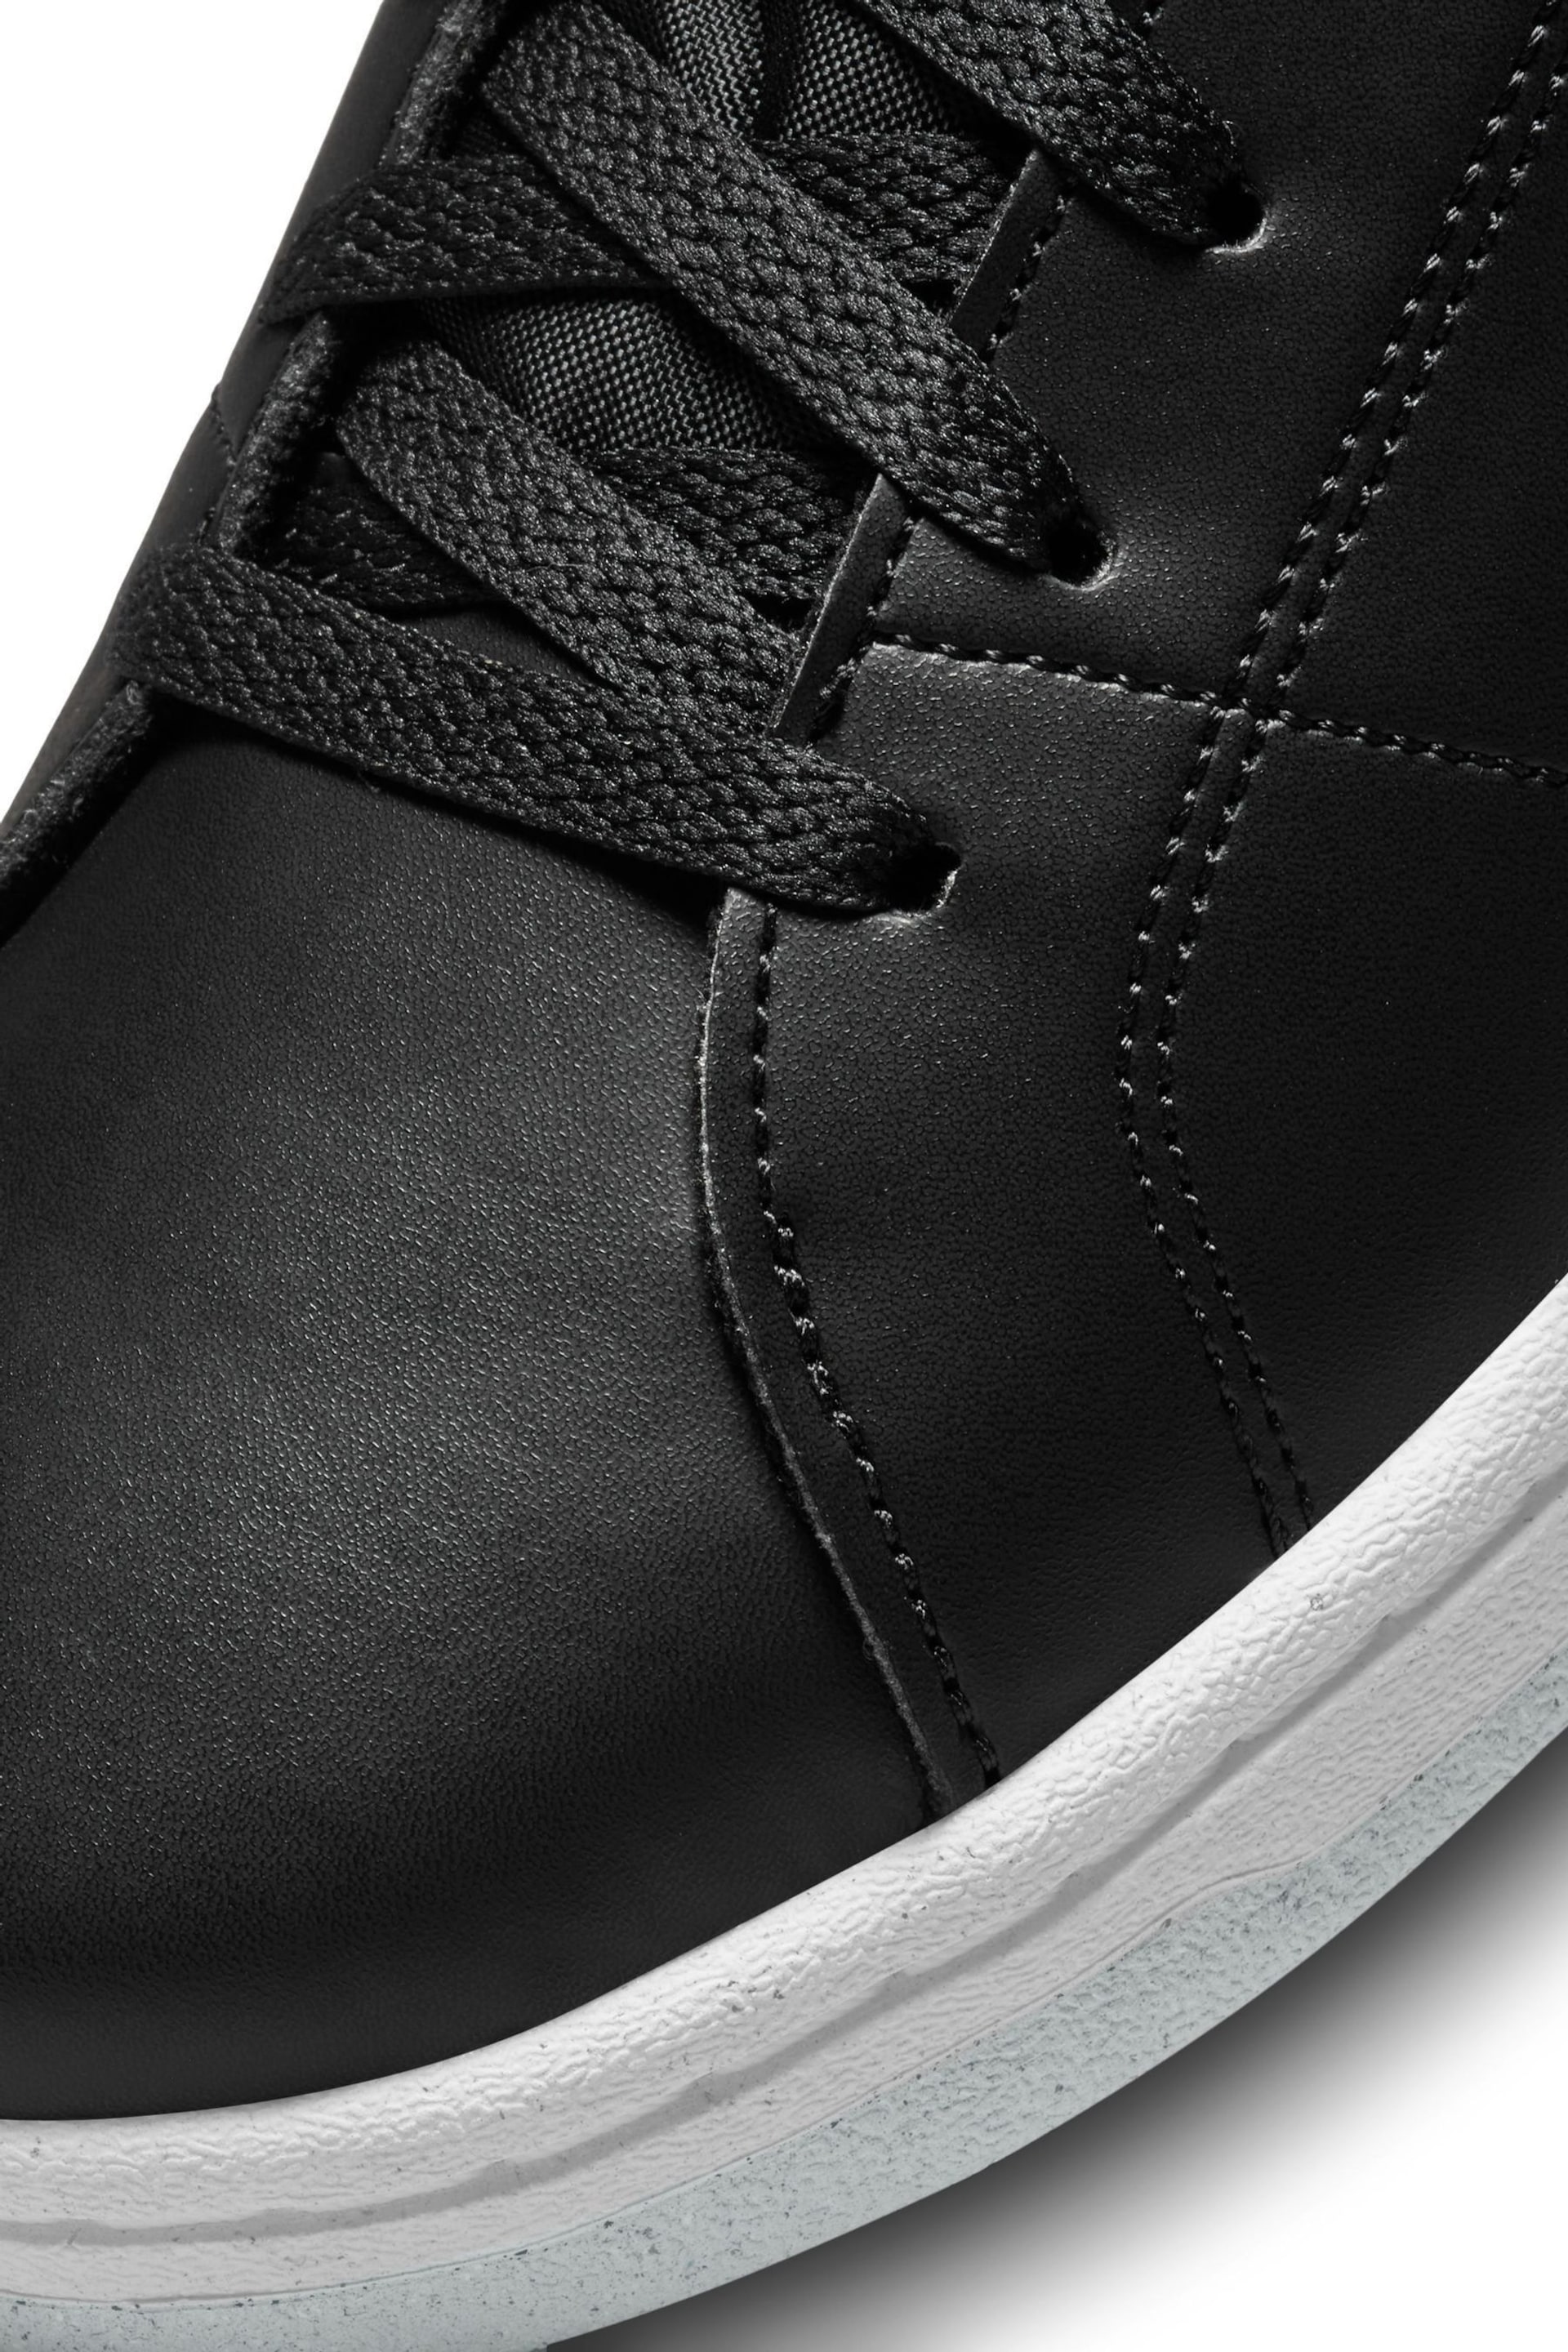 Nike Black Court Royale Trainers - Image 6 of 8